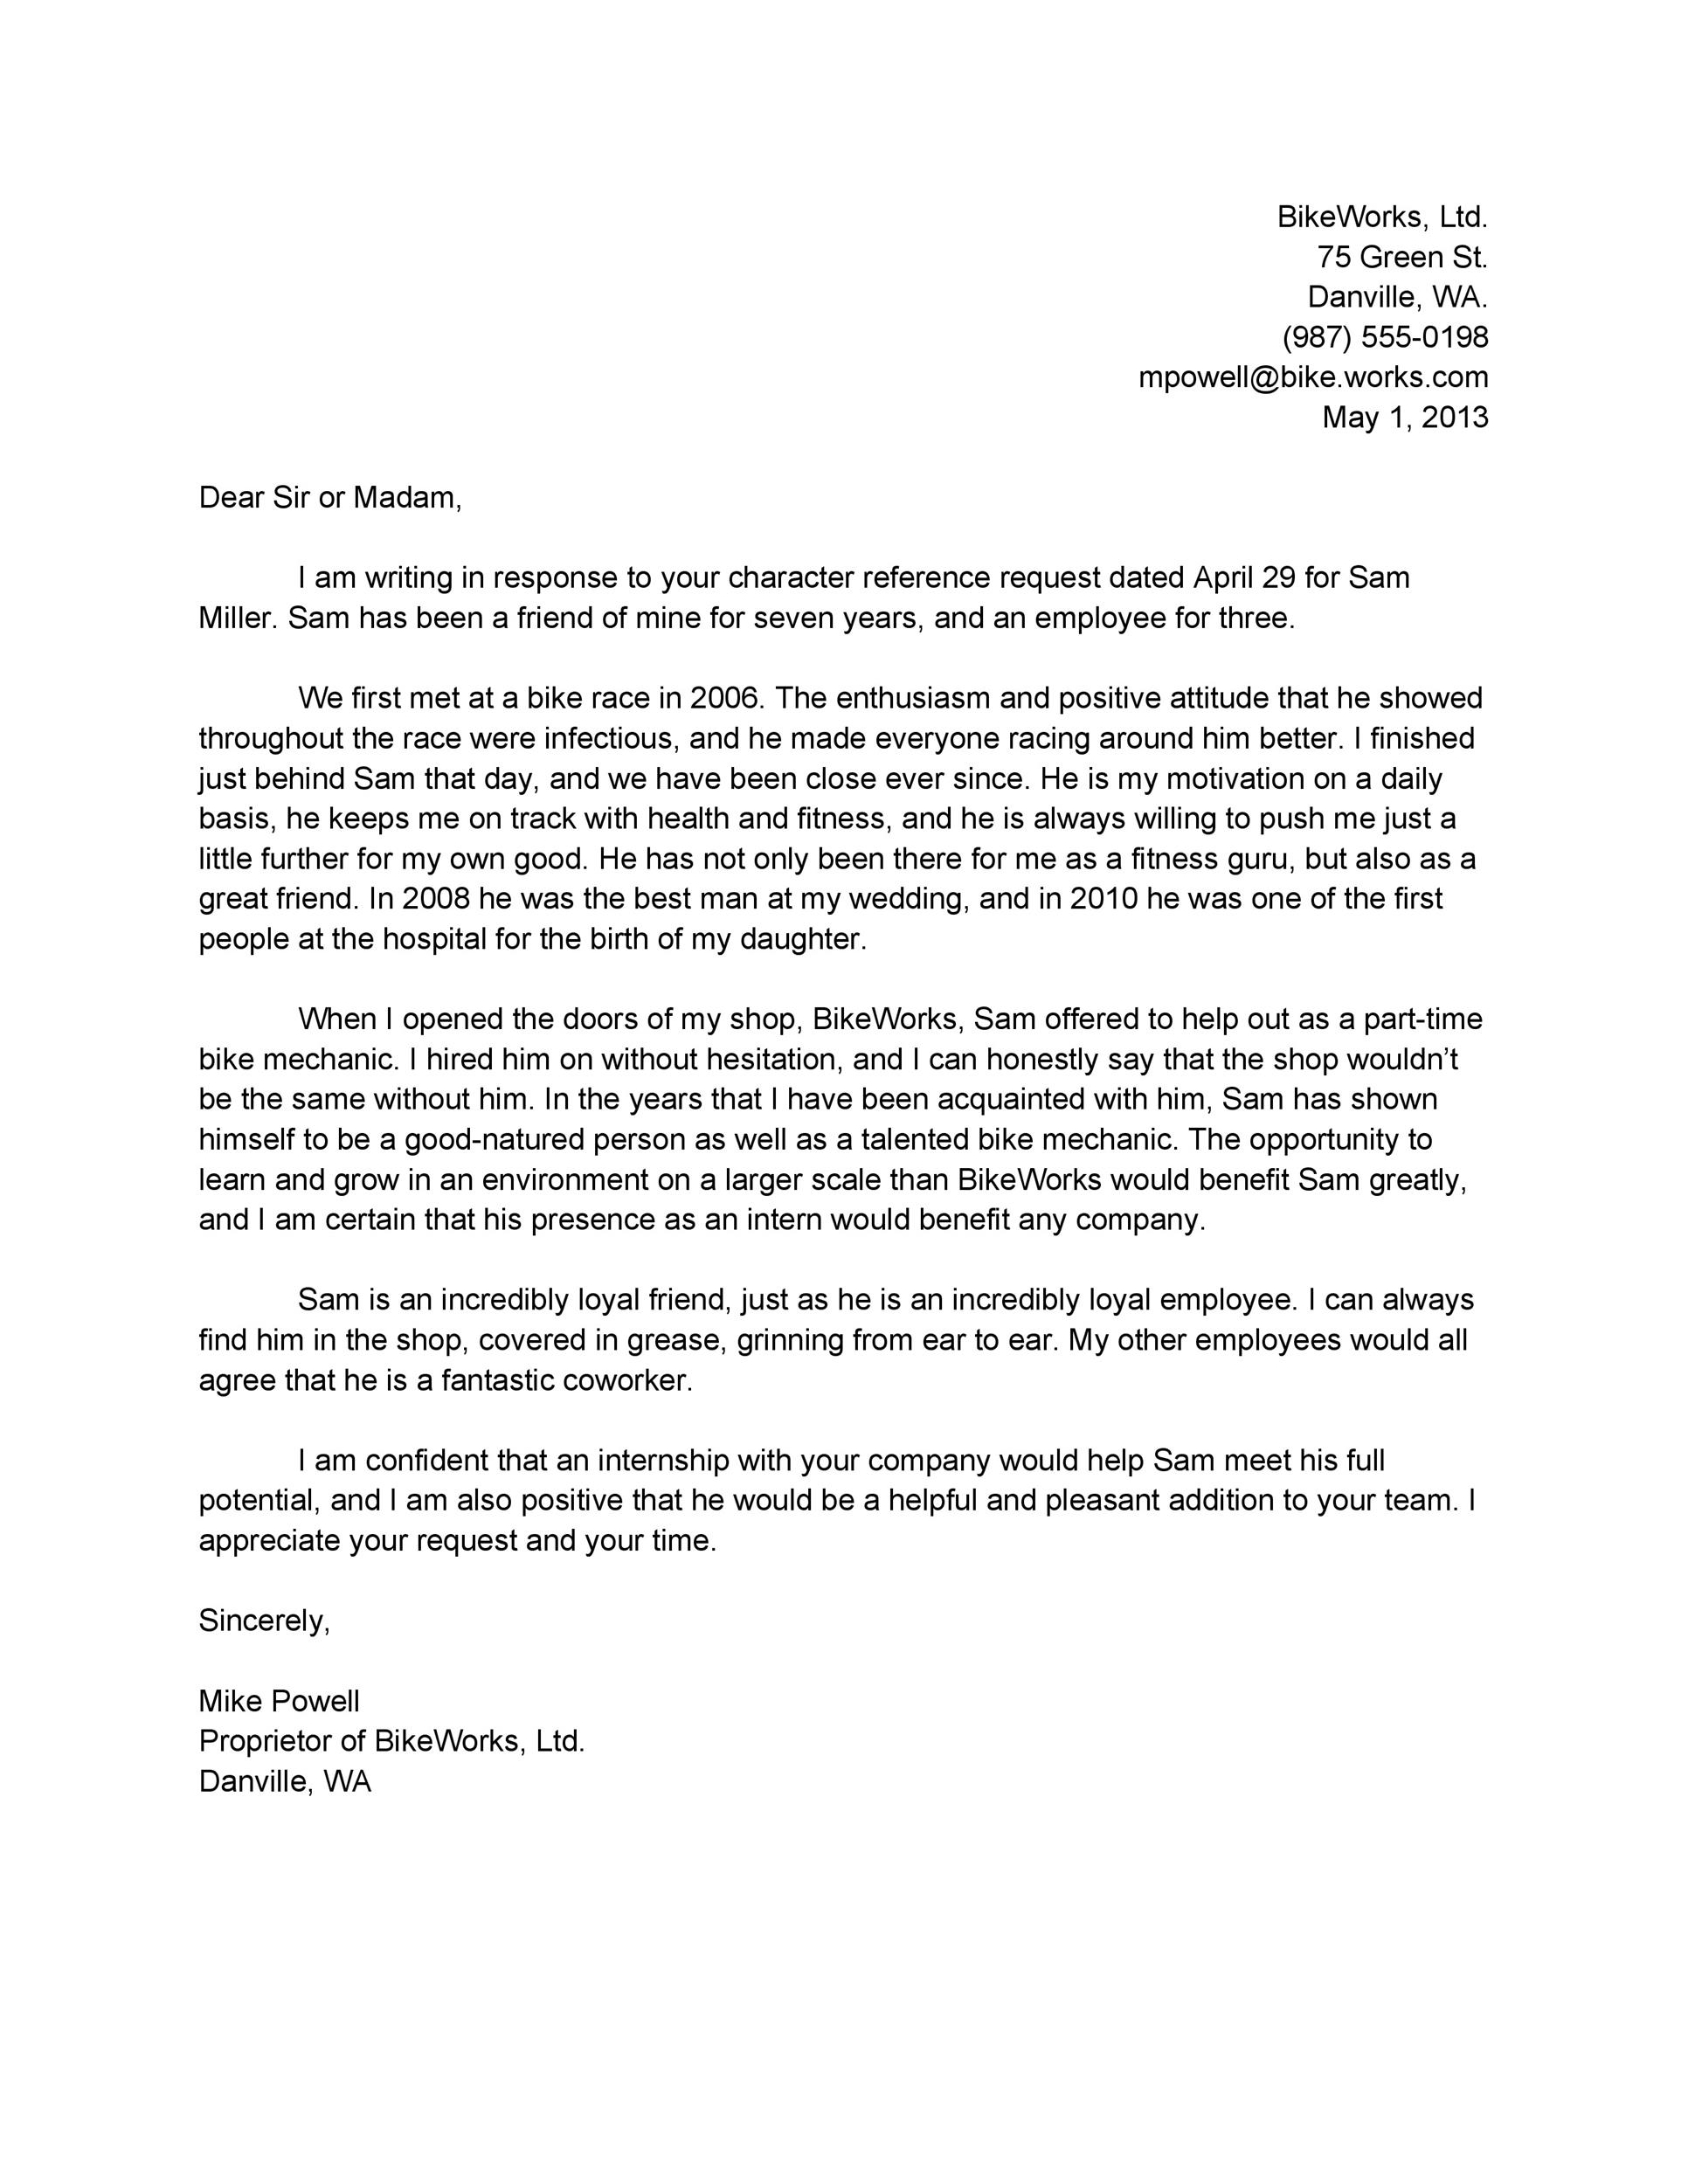 Co Worker Reference Letter from templatelab.com